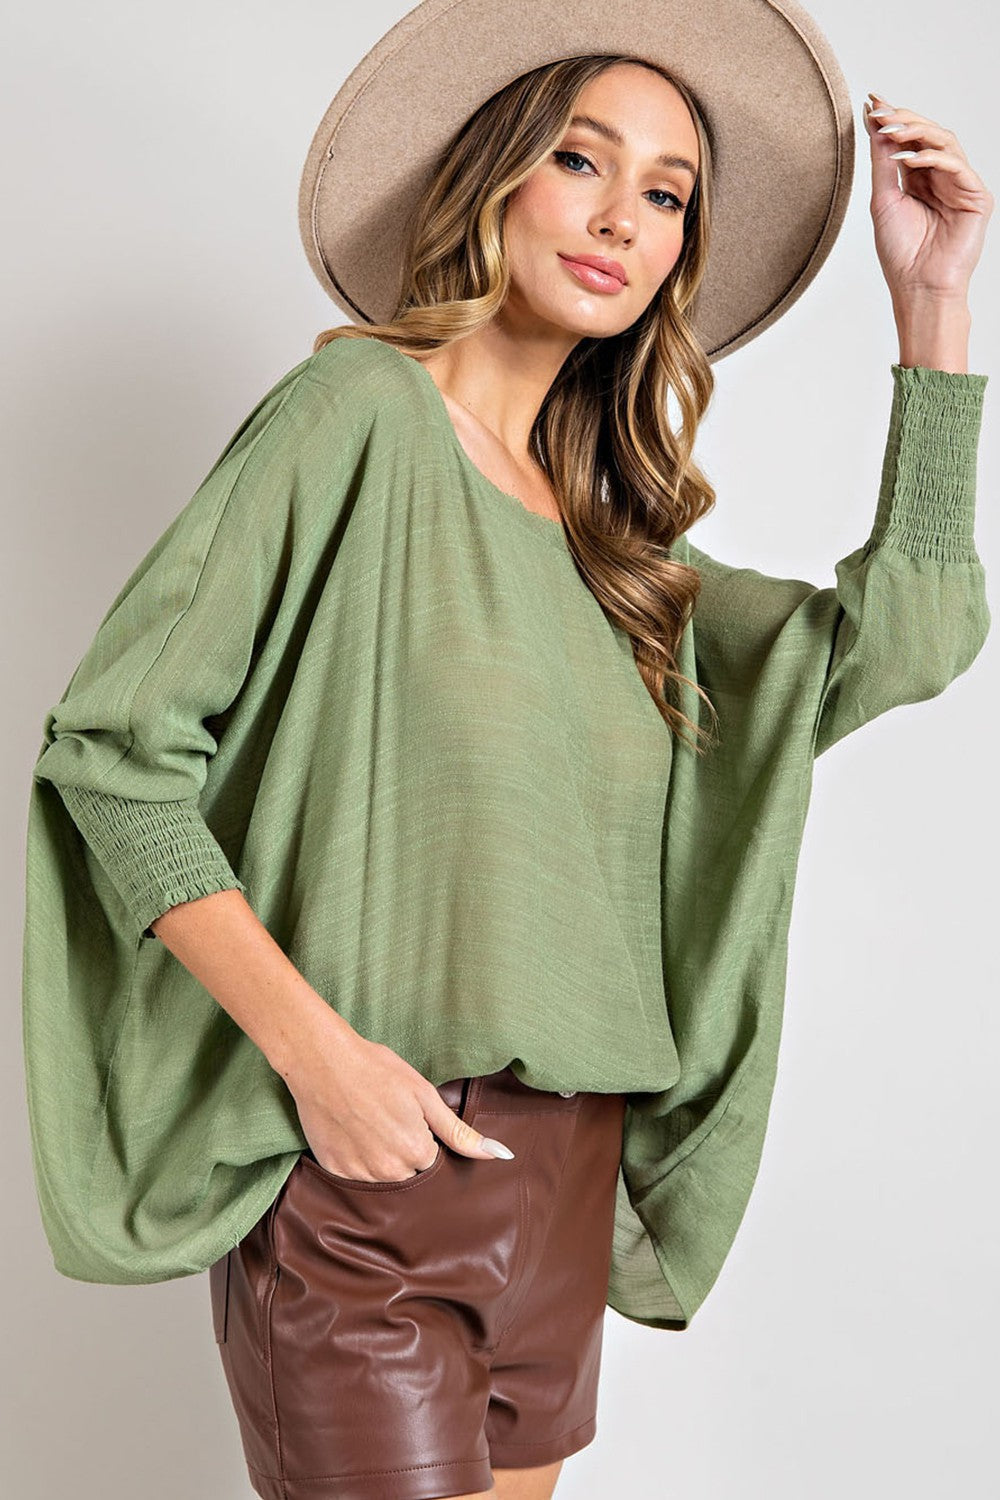 : Imperfectly Perfect Alignment Sage Smock Cuff Blouse - Catching Fireflies Boutique